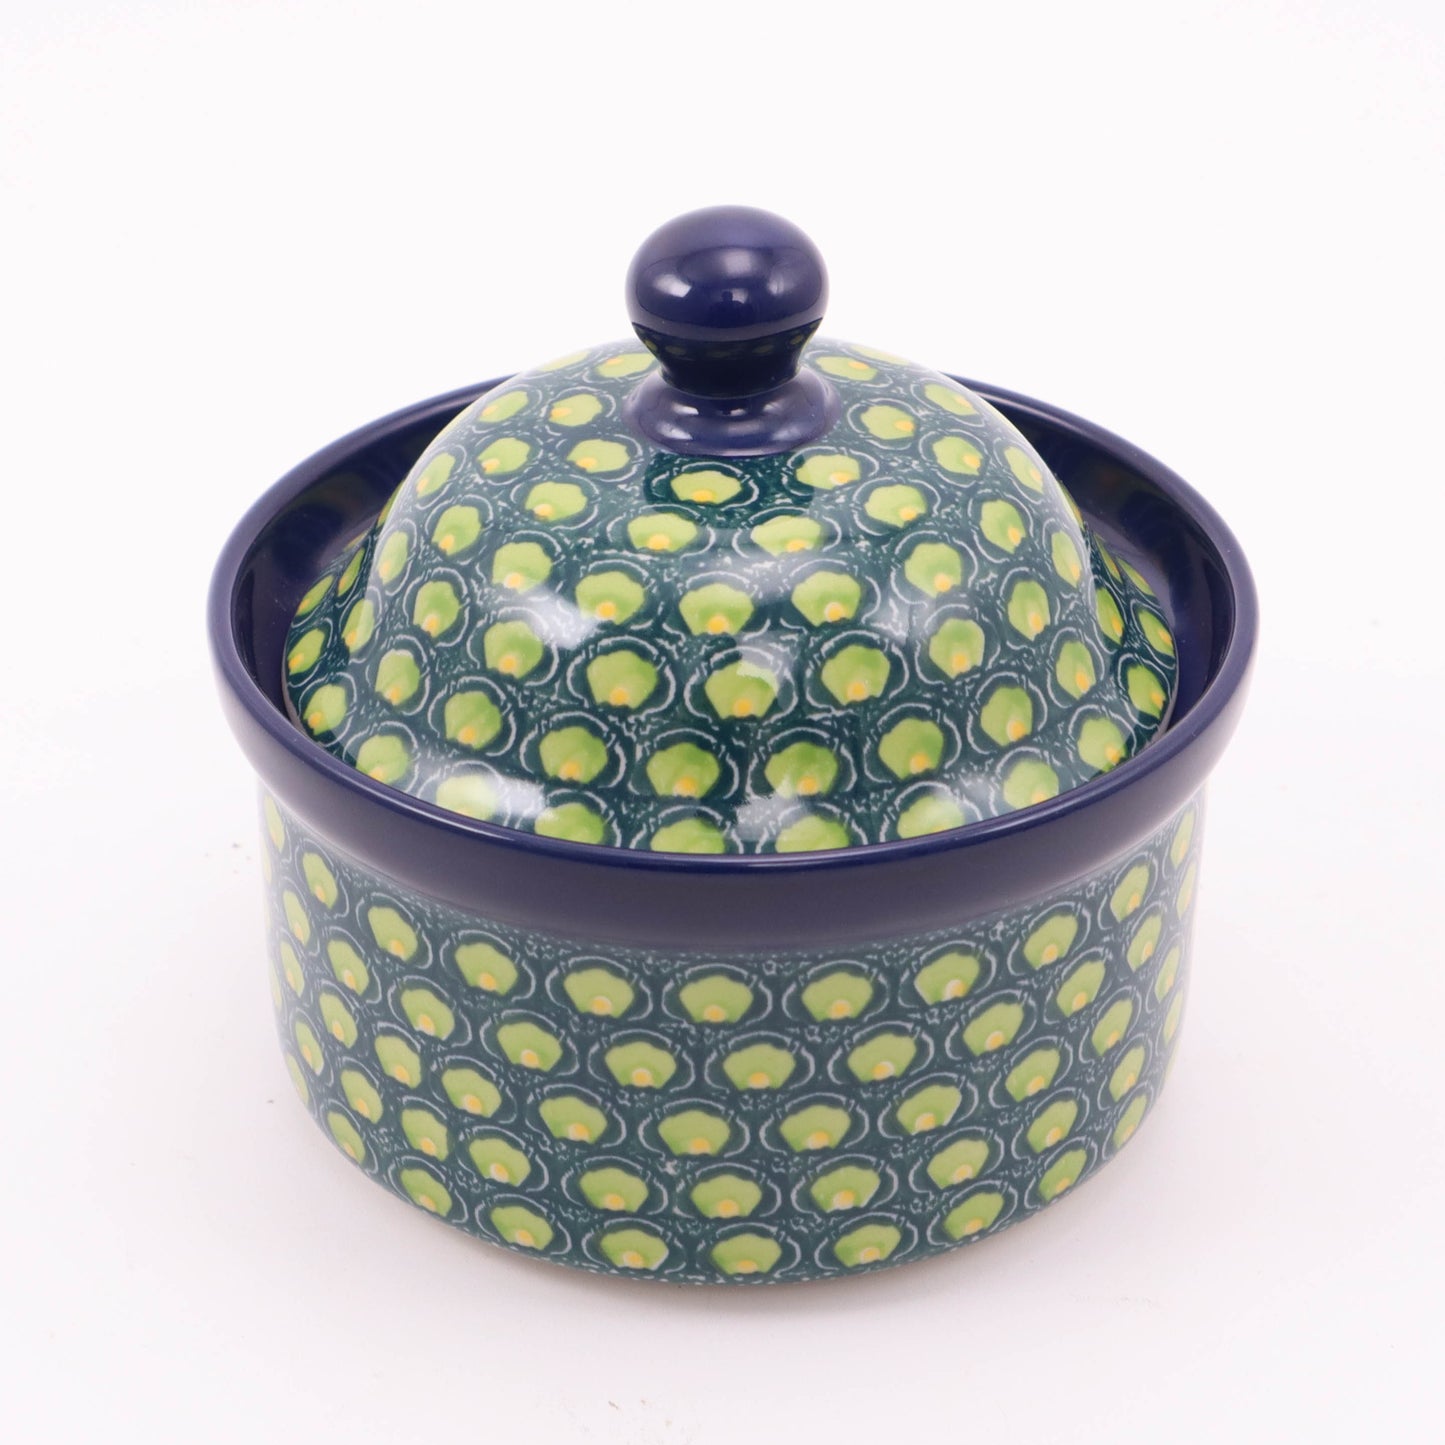 4"x5" Round Covered Dish. Pattern: Limelight